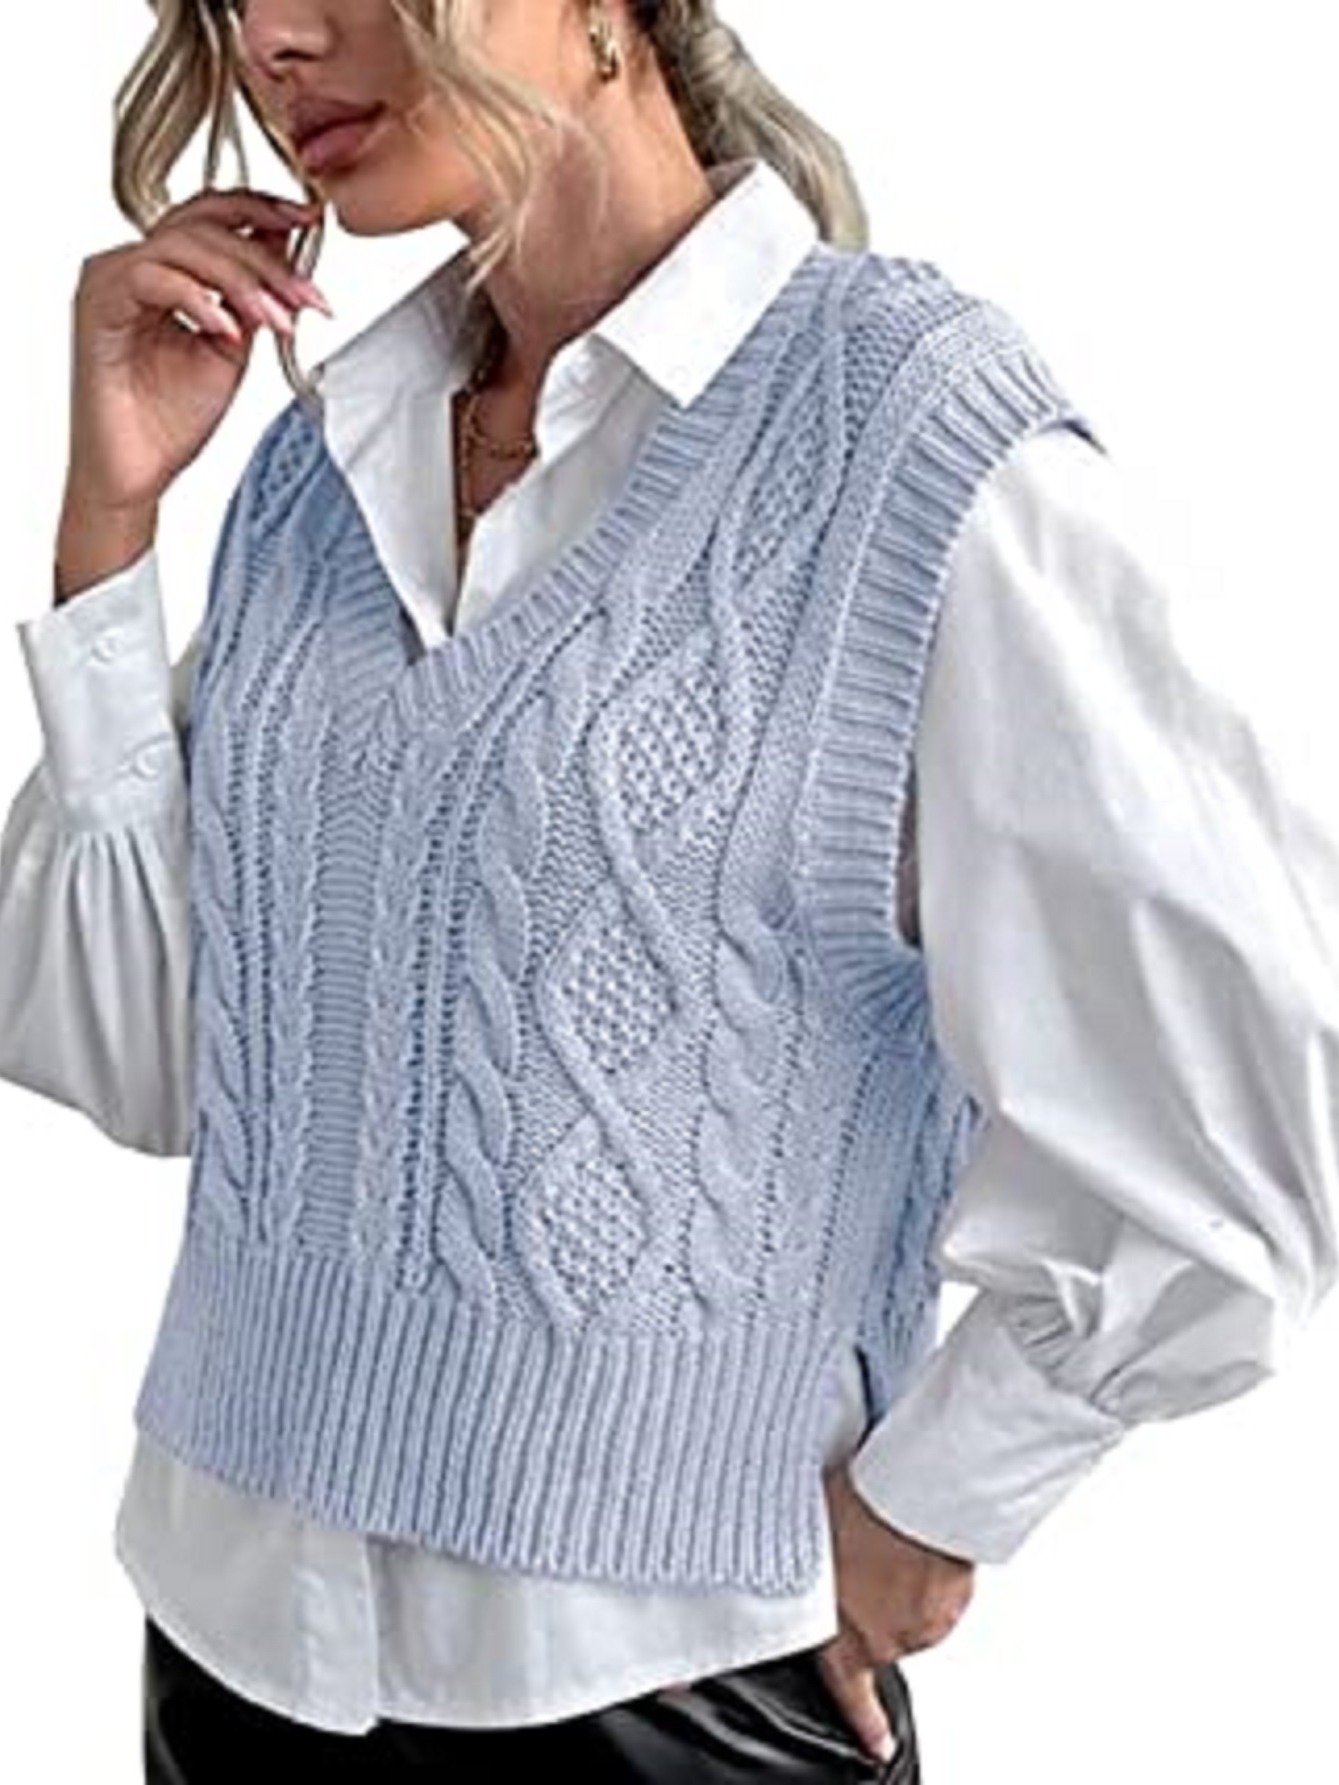 Sweater Vest for Women V Neck Sleeveless Knit Solid Casual Ribbed